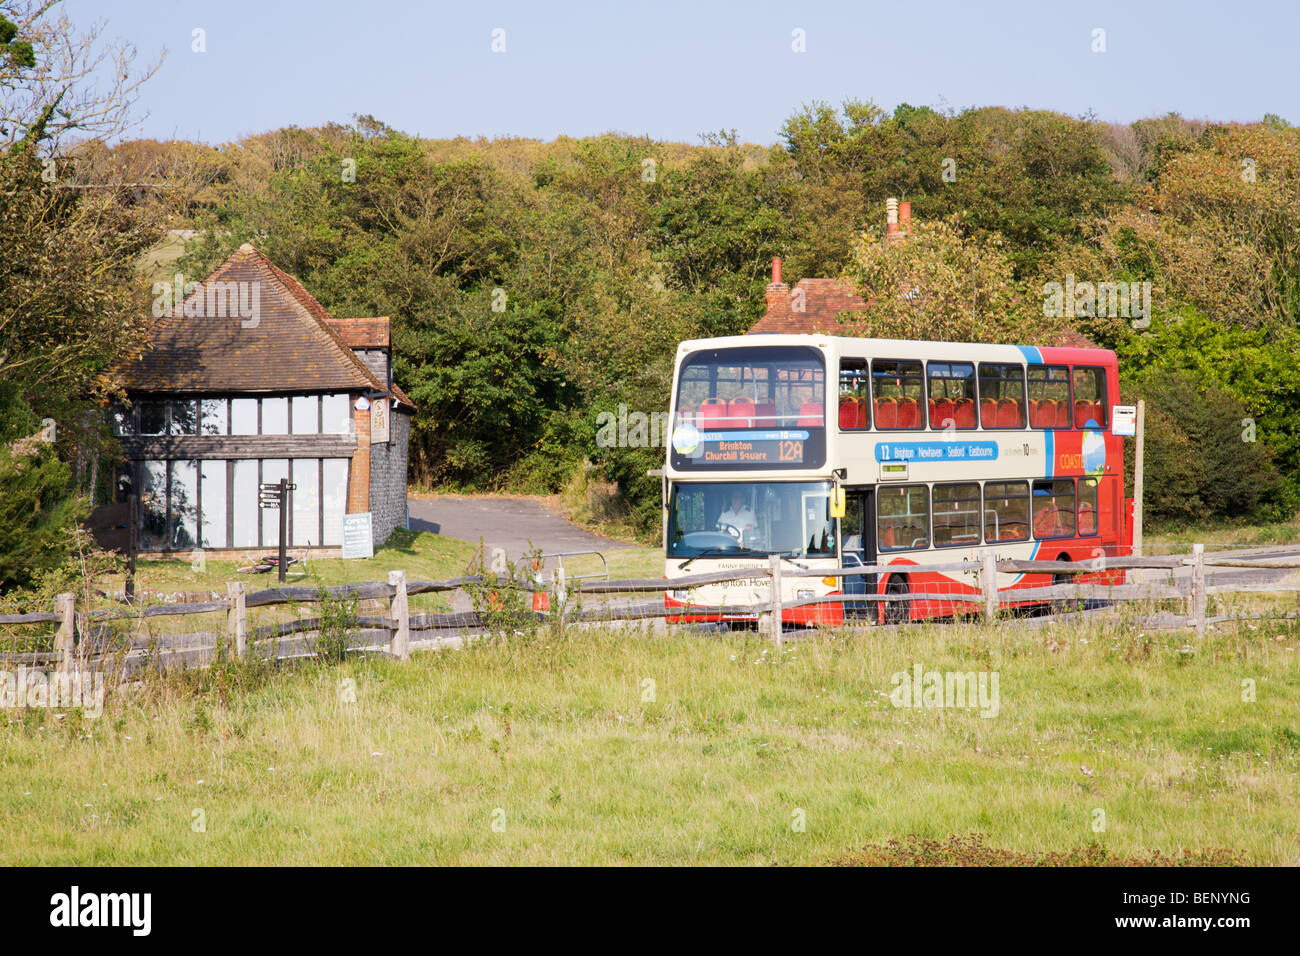 The Coaster bus, "Seven Sisters Country Park", Sussex, England, UK Stock  Photo - Alamy